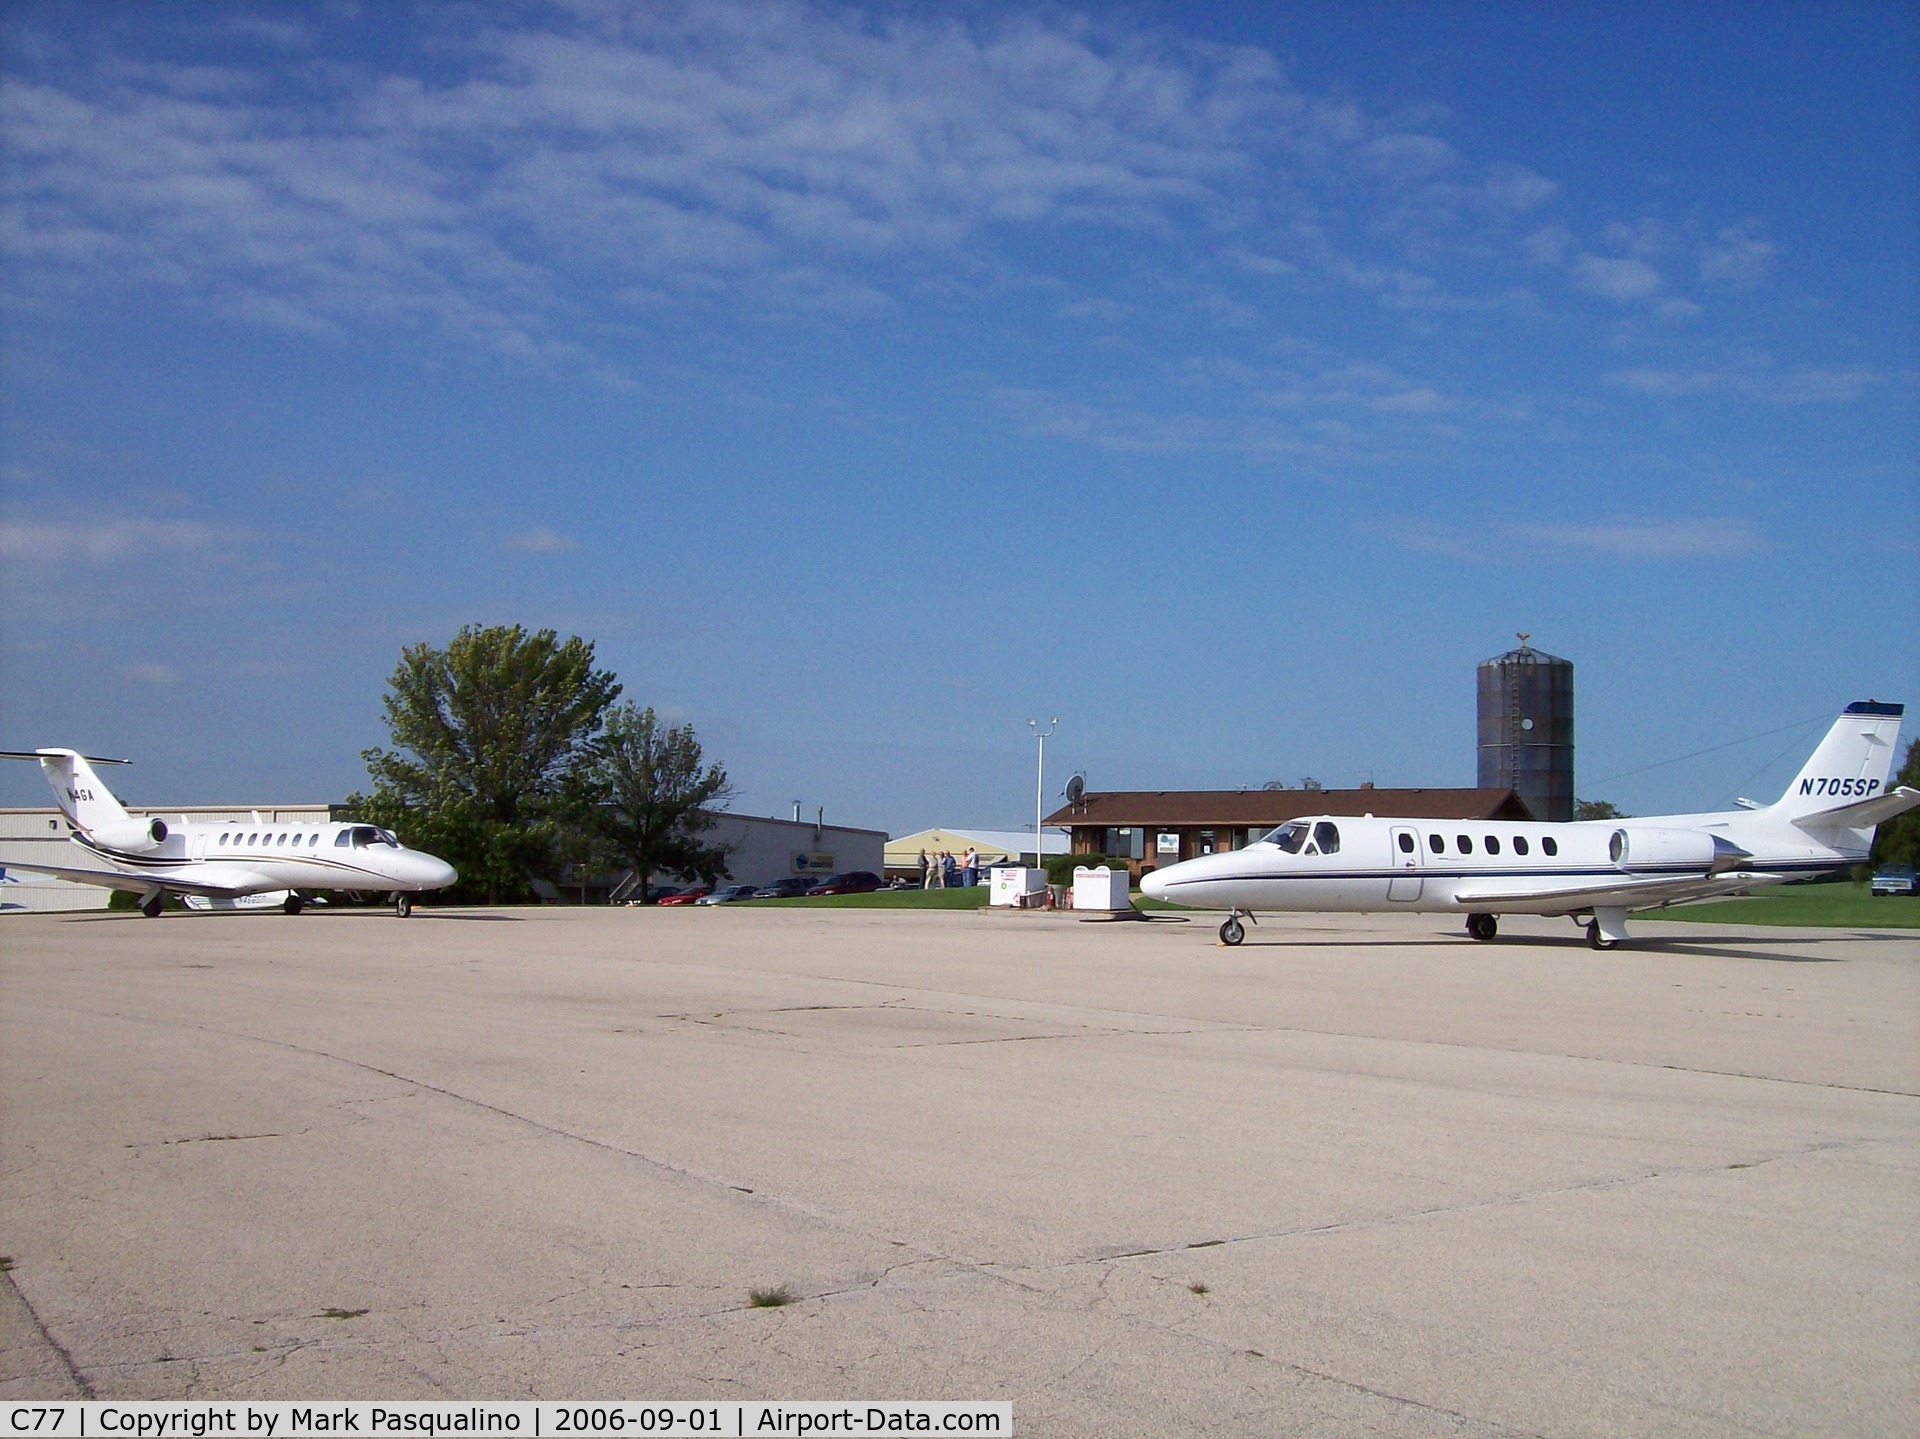 Poplar Grove Airport (C77) - Two business jets at Poplar Grove on the same day.